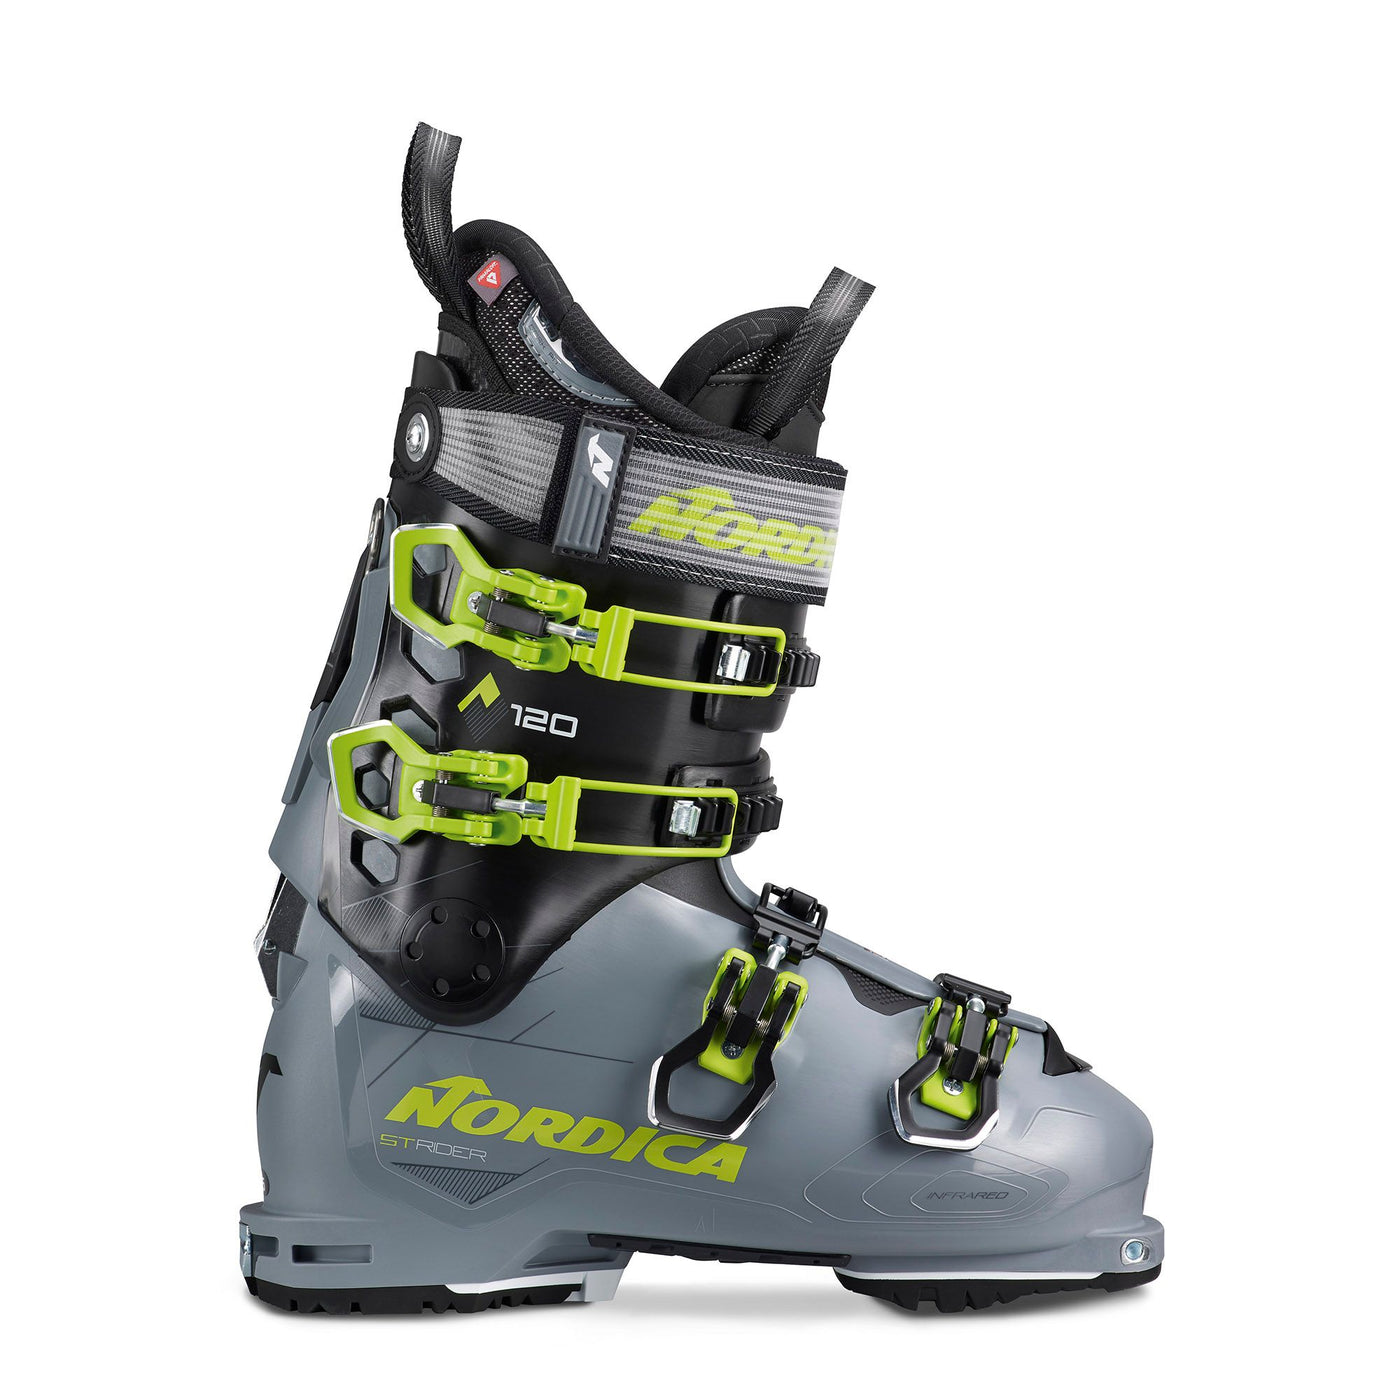 Nordica Strider 120 DYN Freeride Touring Ski Boots - 2023 - DISCONTINUED SKI BOOTS Nordica 25.5  